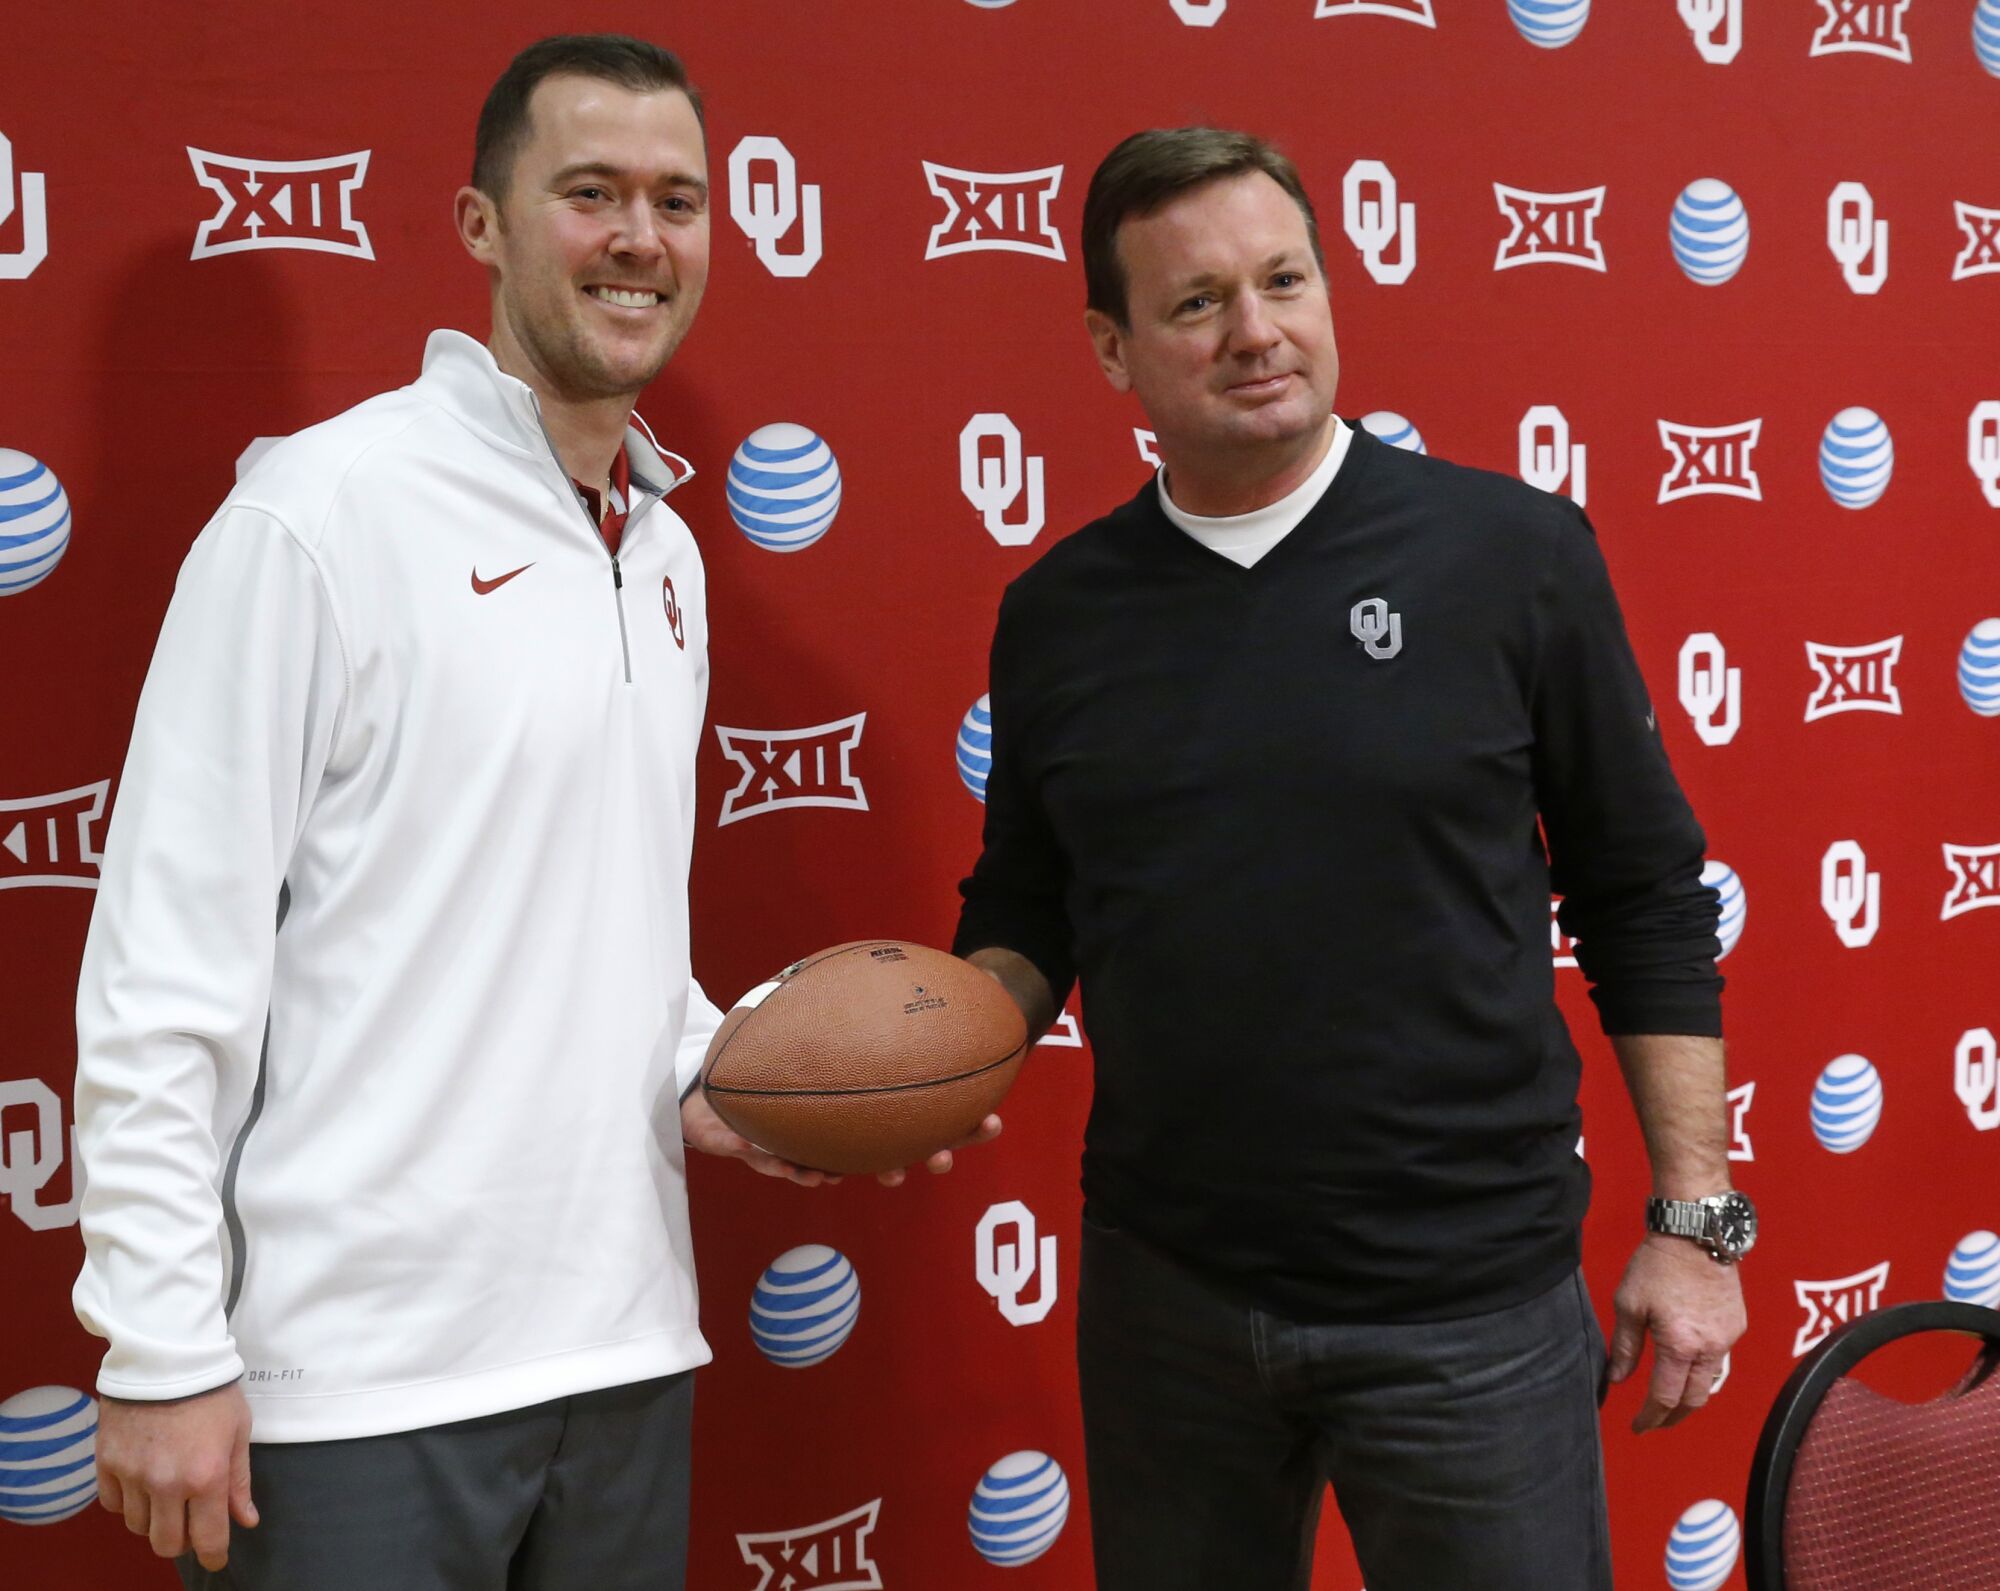 Oklahoma coach Bob Stoops poses for a photo with then-new offensive coordinator Lincoln Riley in 2015